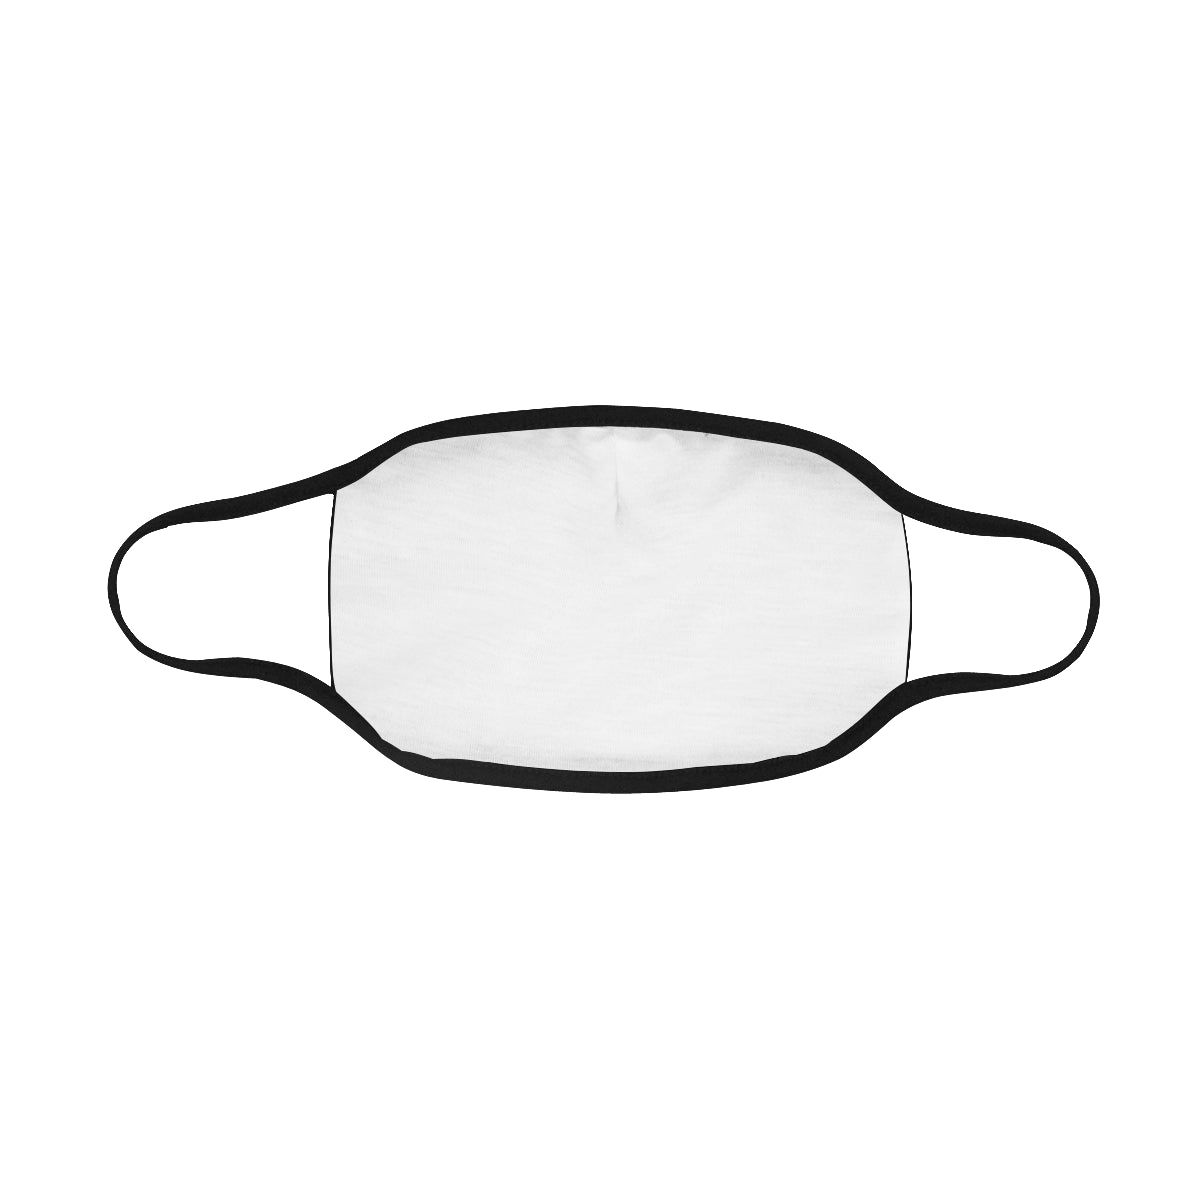 Geometric 1287 Mouth Mask in One Piece (2 Filters Included) (Model M02)